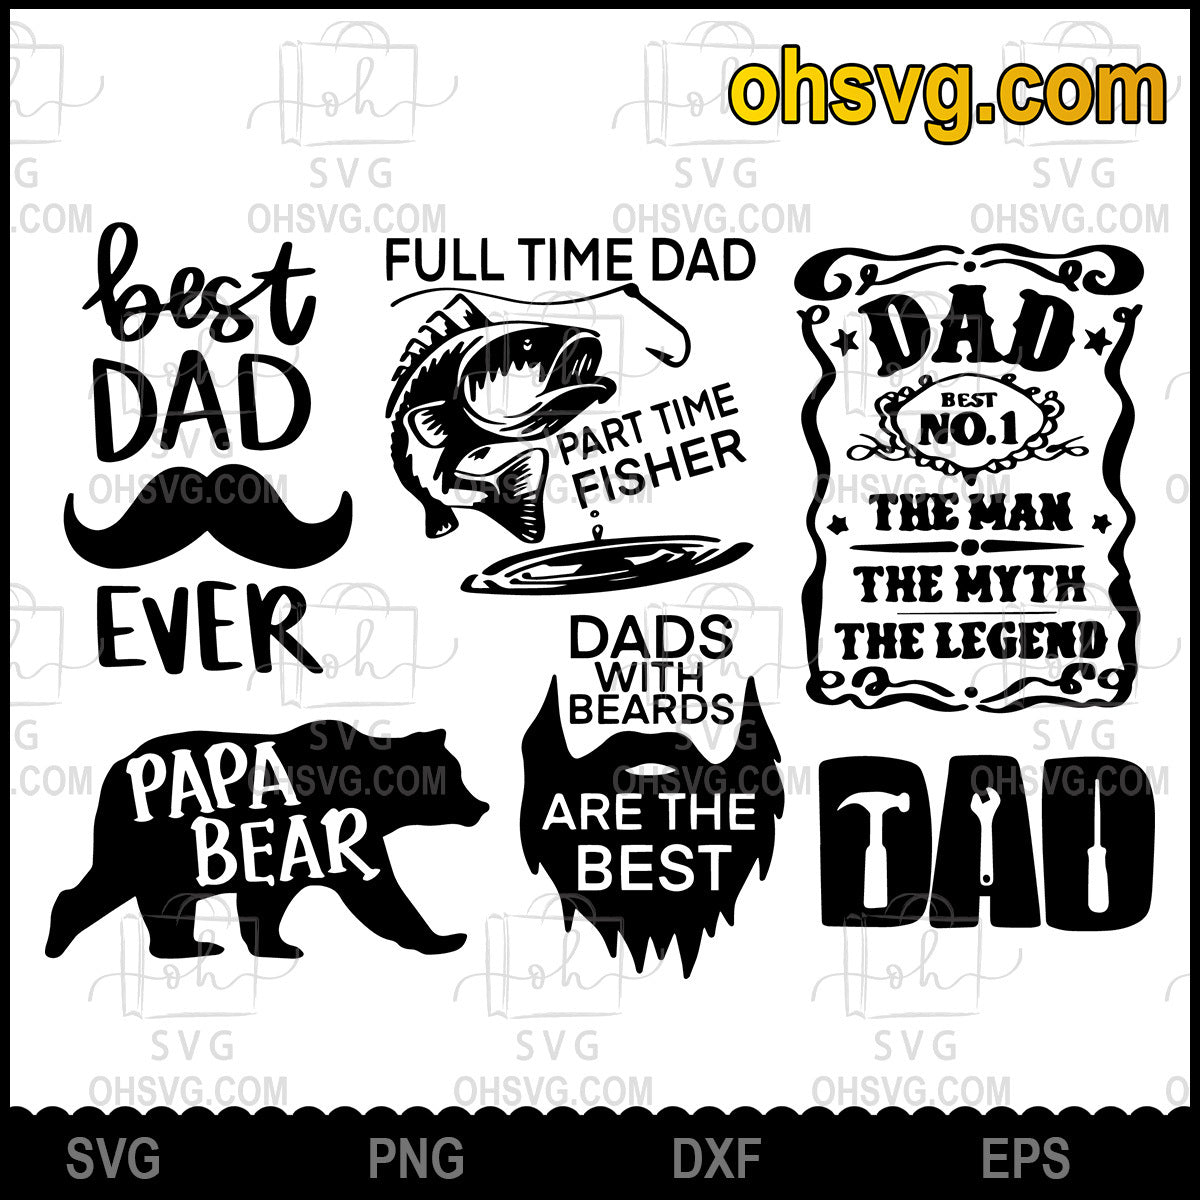 Best Dad Ever, Papa Bear Dads With Beards, Fishing Dad, Fixing Dad SVG, Funny Father's Day SVG